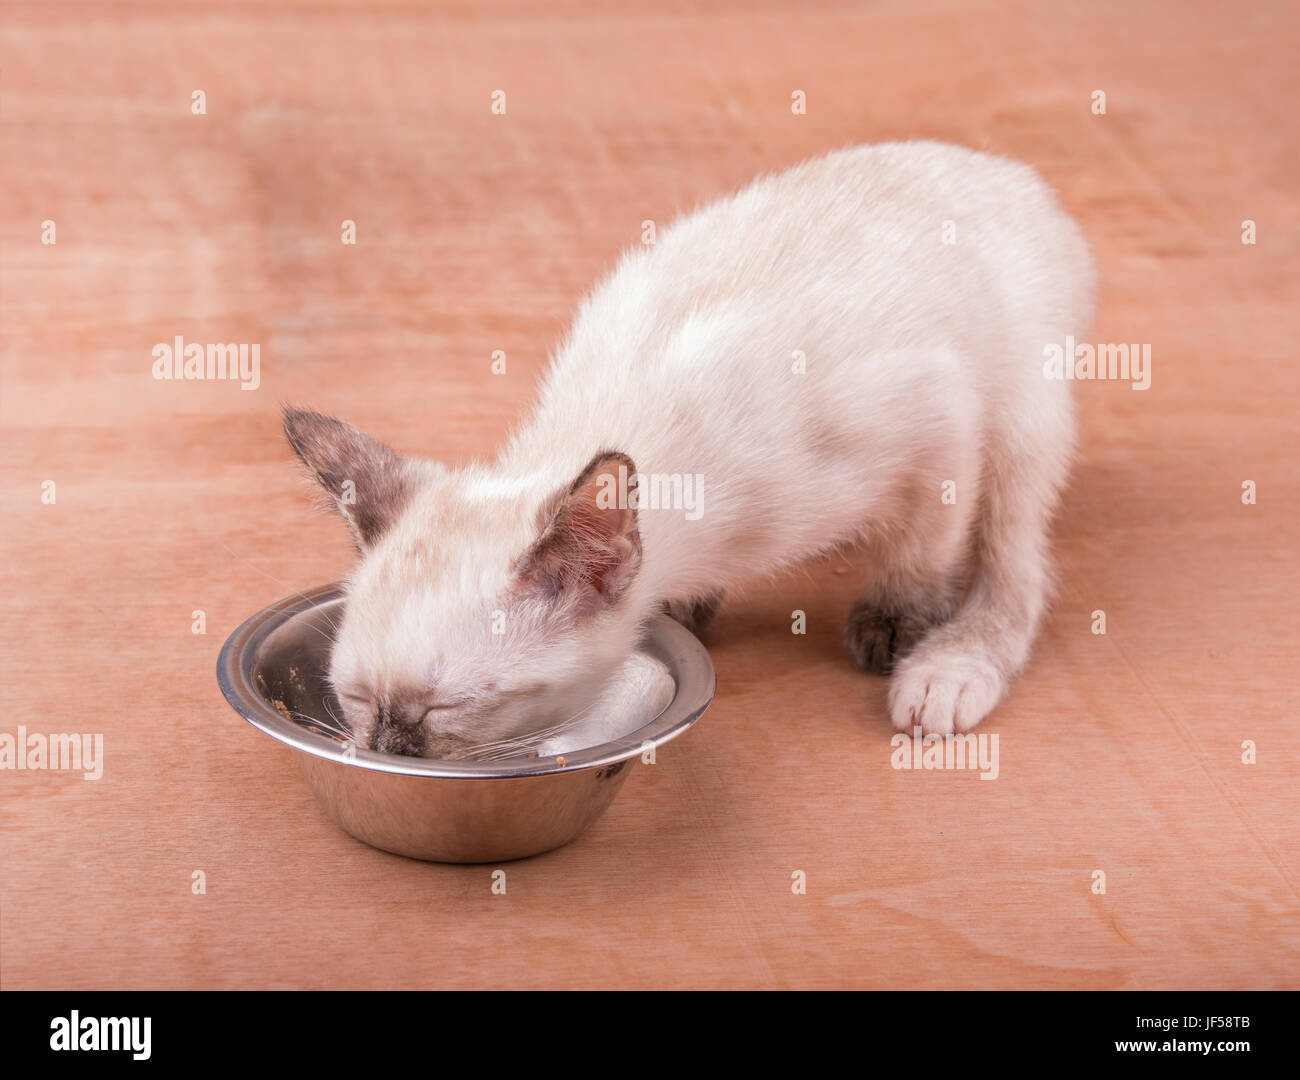 Tiny tortie point Siamese kitten eating from a silver bowl Stock Photo